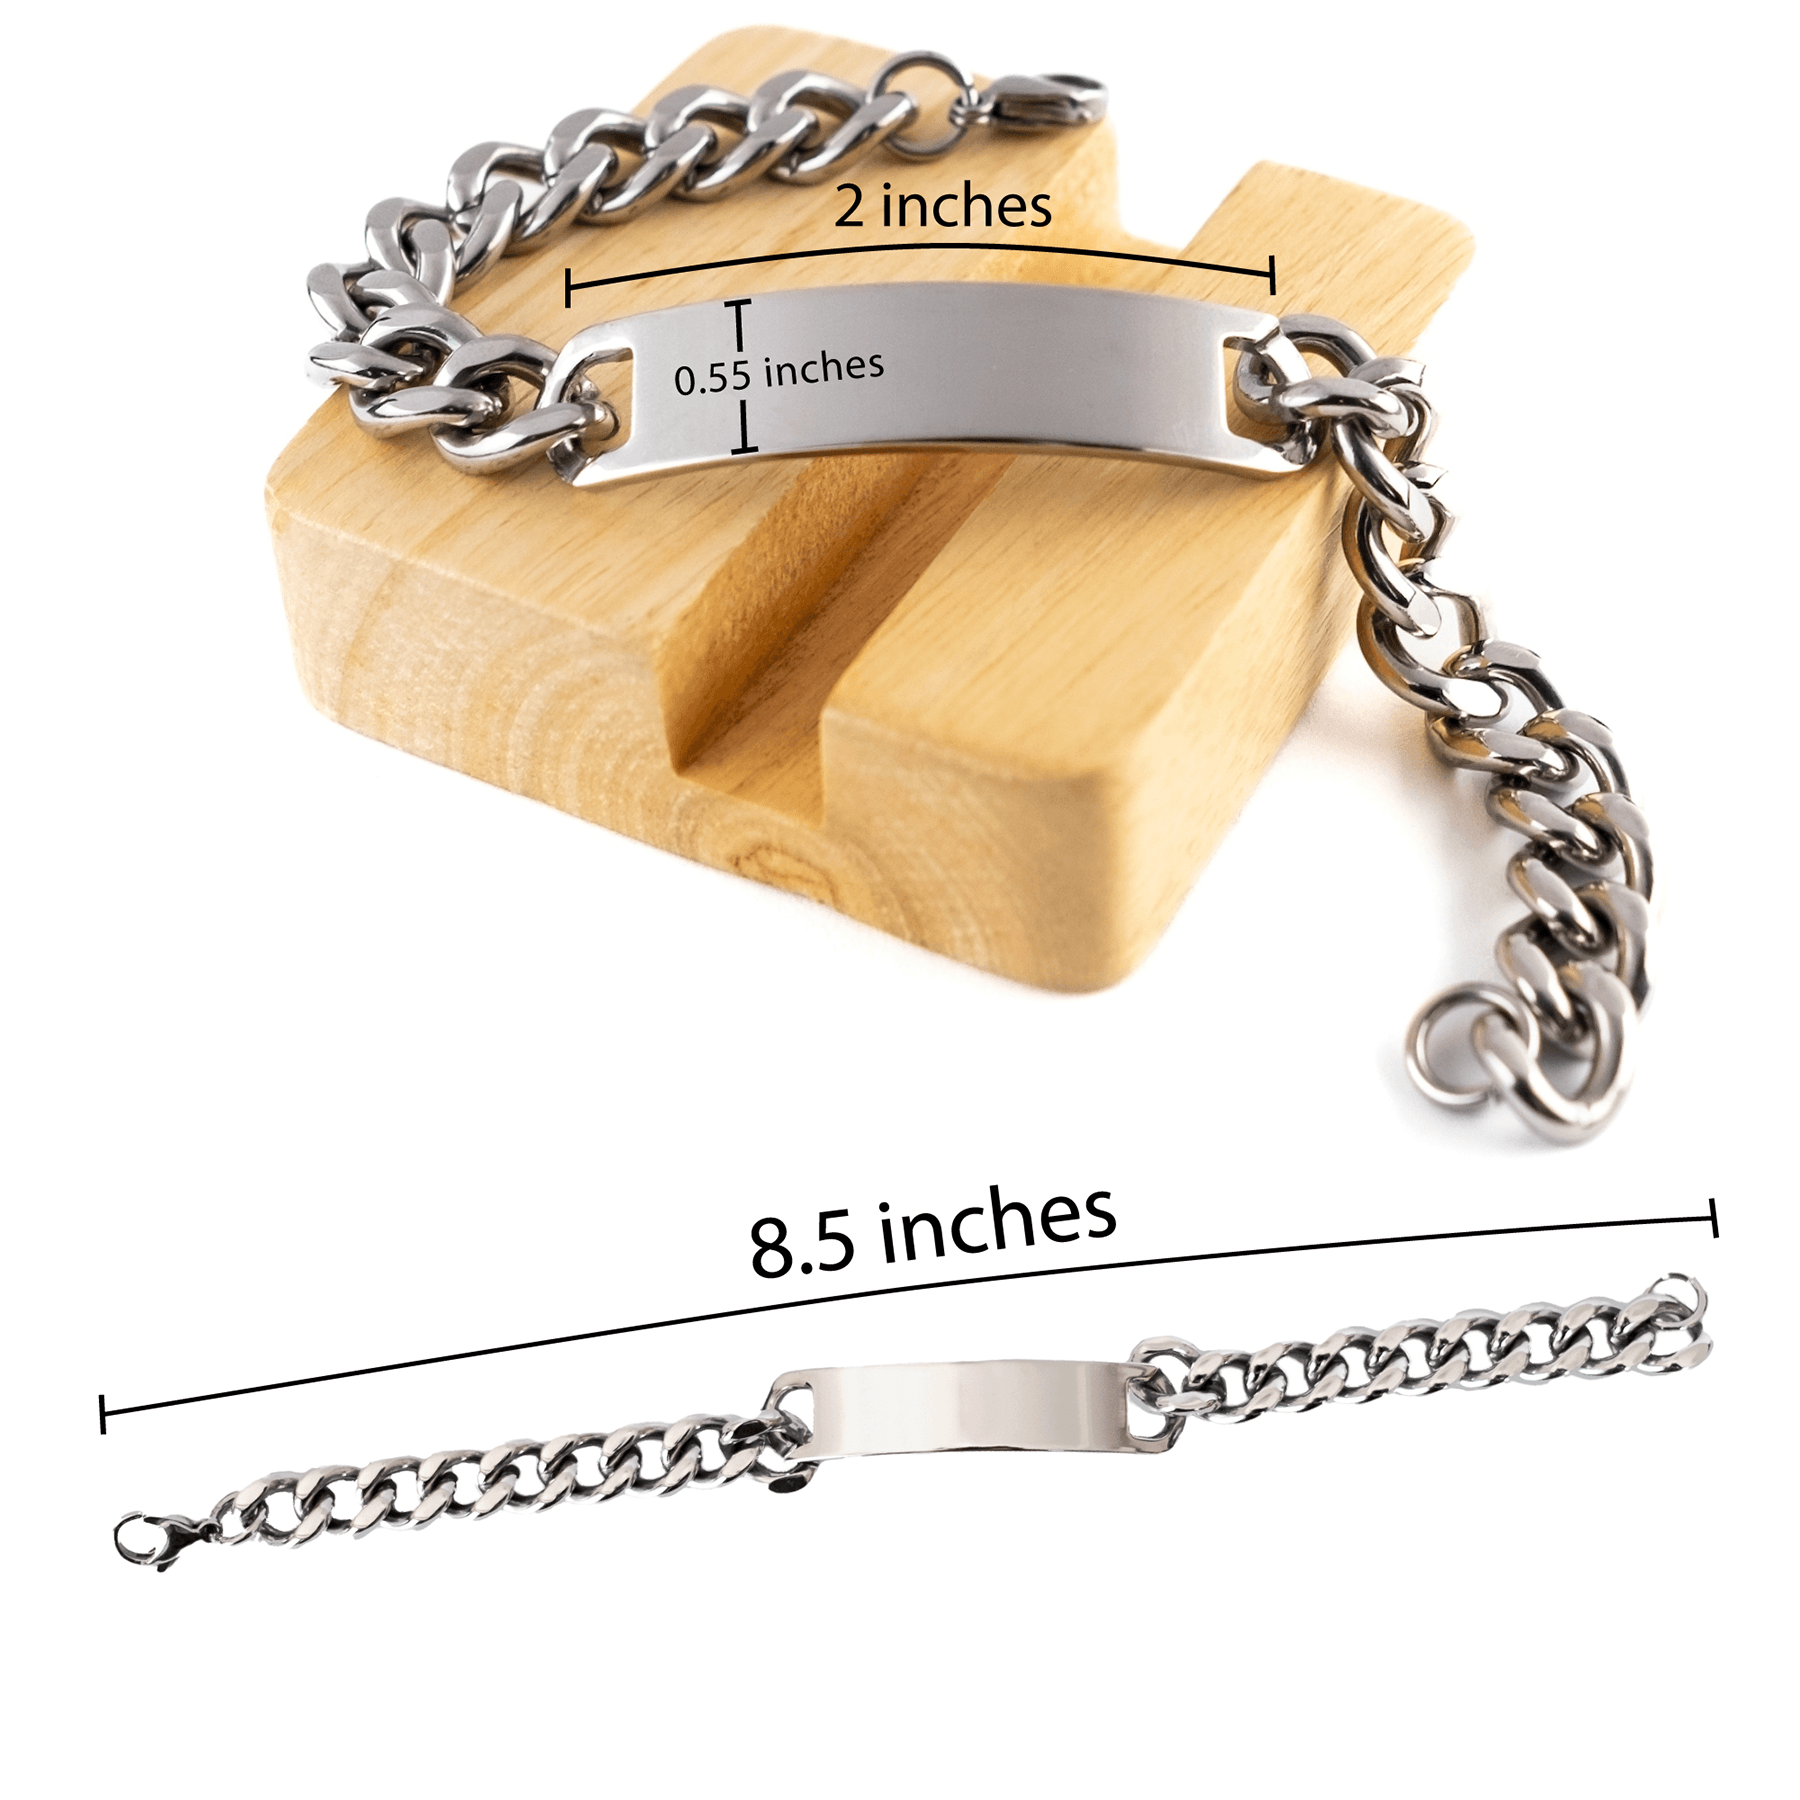 Choir Director Cuban Chain Link Engraved Bracelet - Thanks for being who you are - Birthday Christmas Jewelry Gifts Coworkers Colleague Boss - Mallard Moon Gift Shop